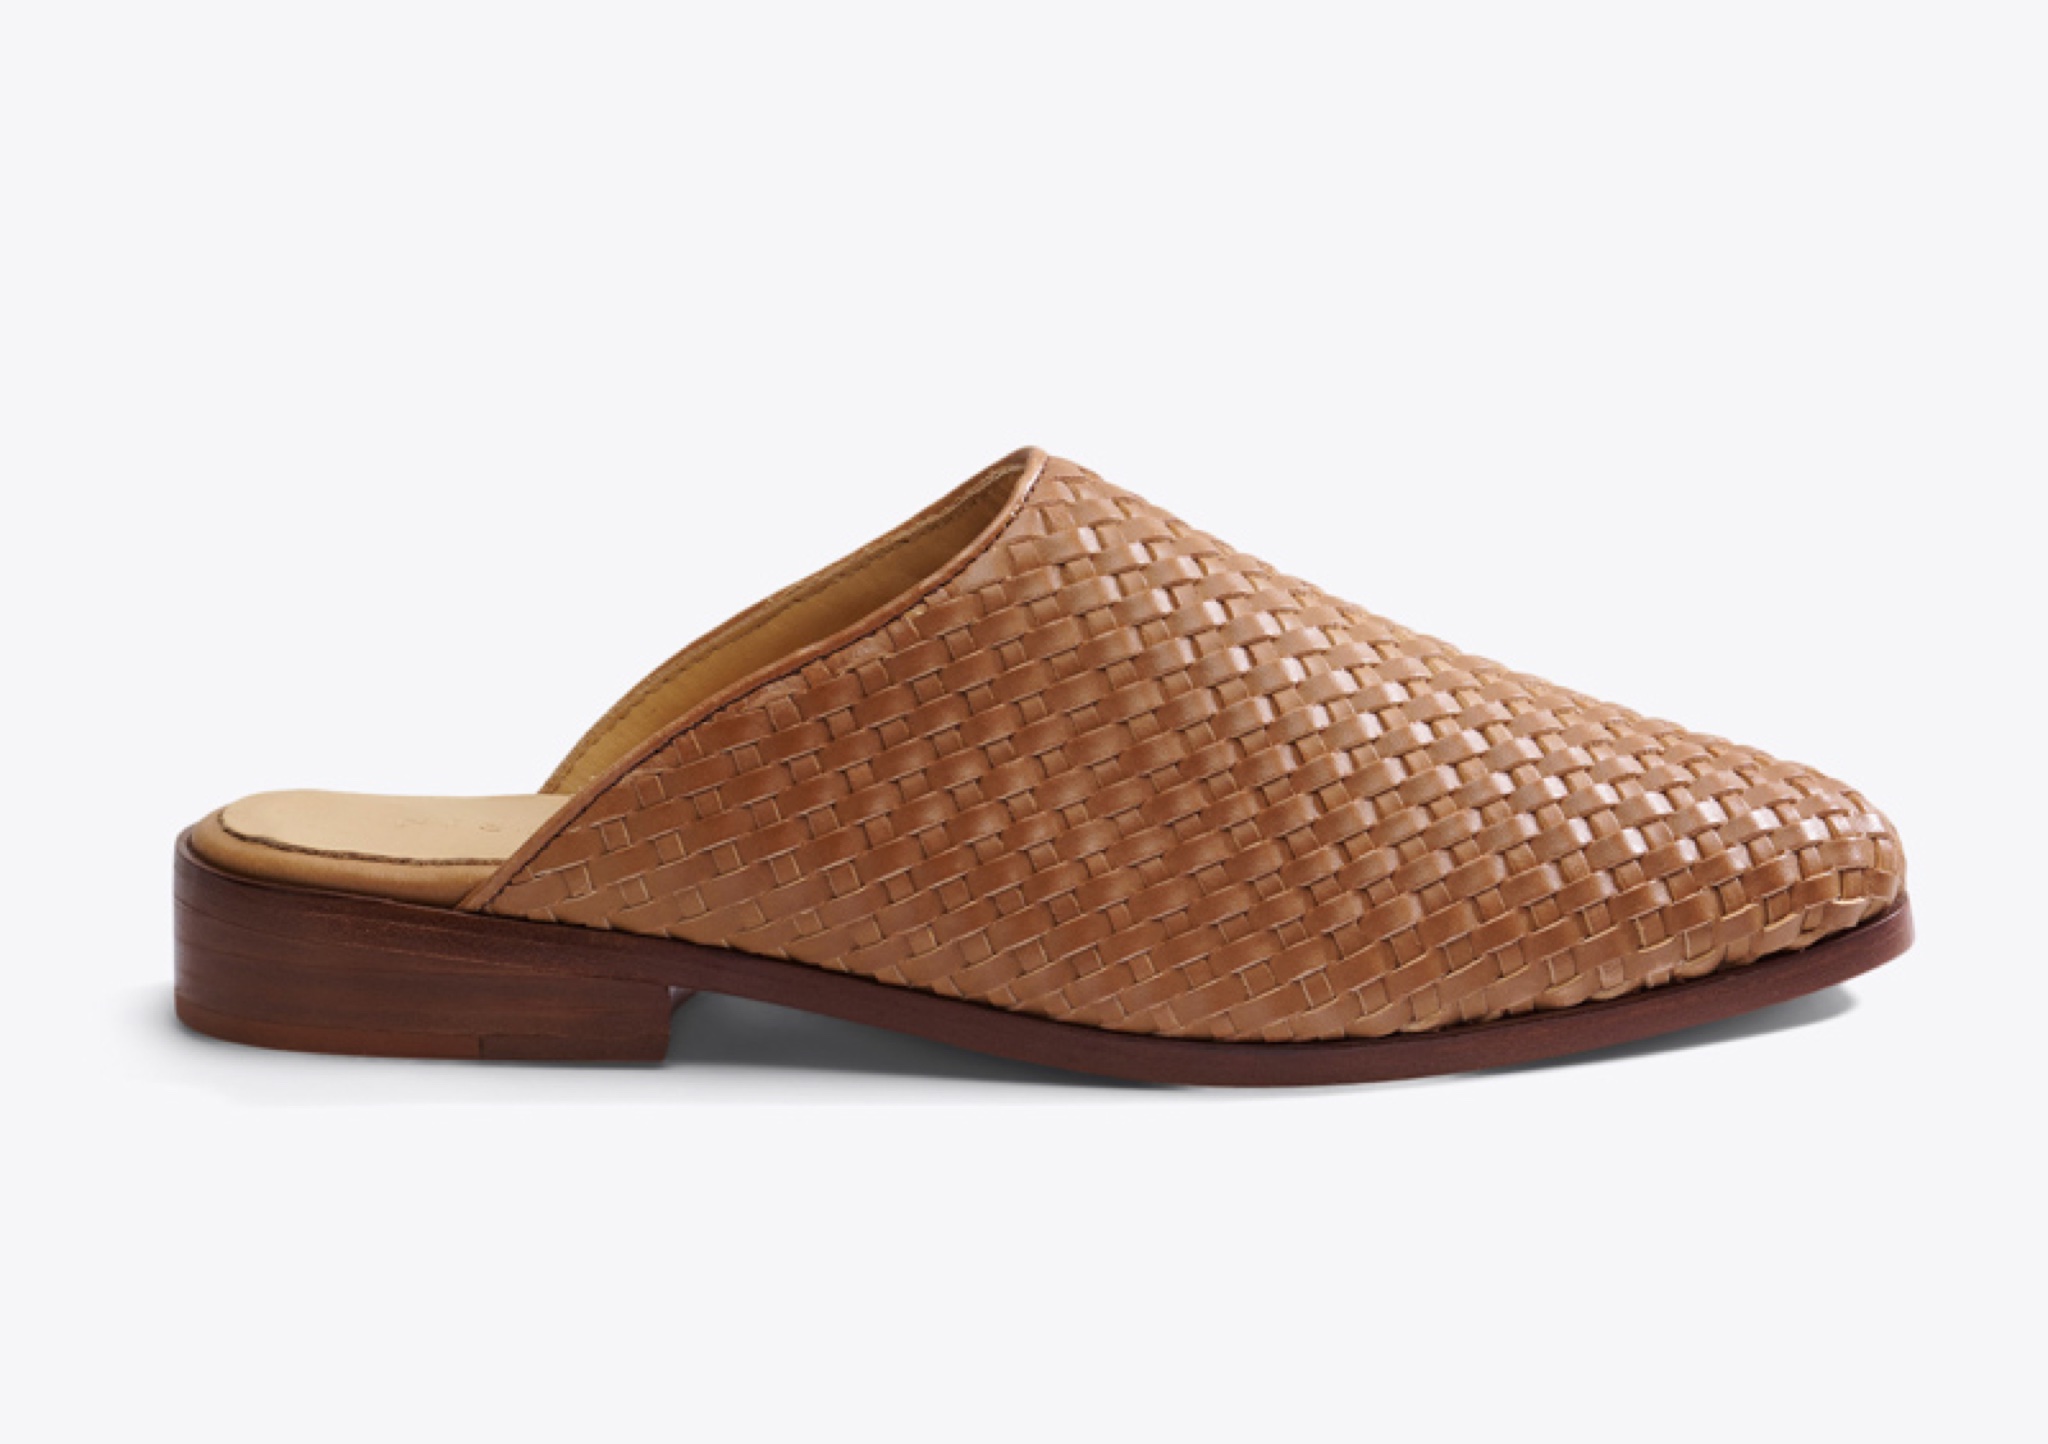 Nisolo Ama Woven Mule Woven Almond - Every Nisolo product is built on the foundation of comfort, function, and design. 